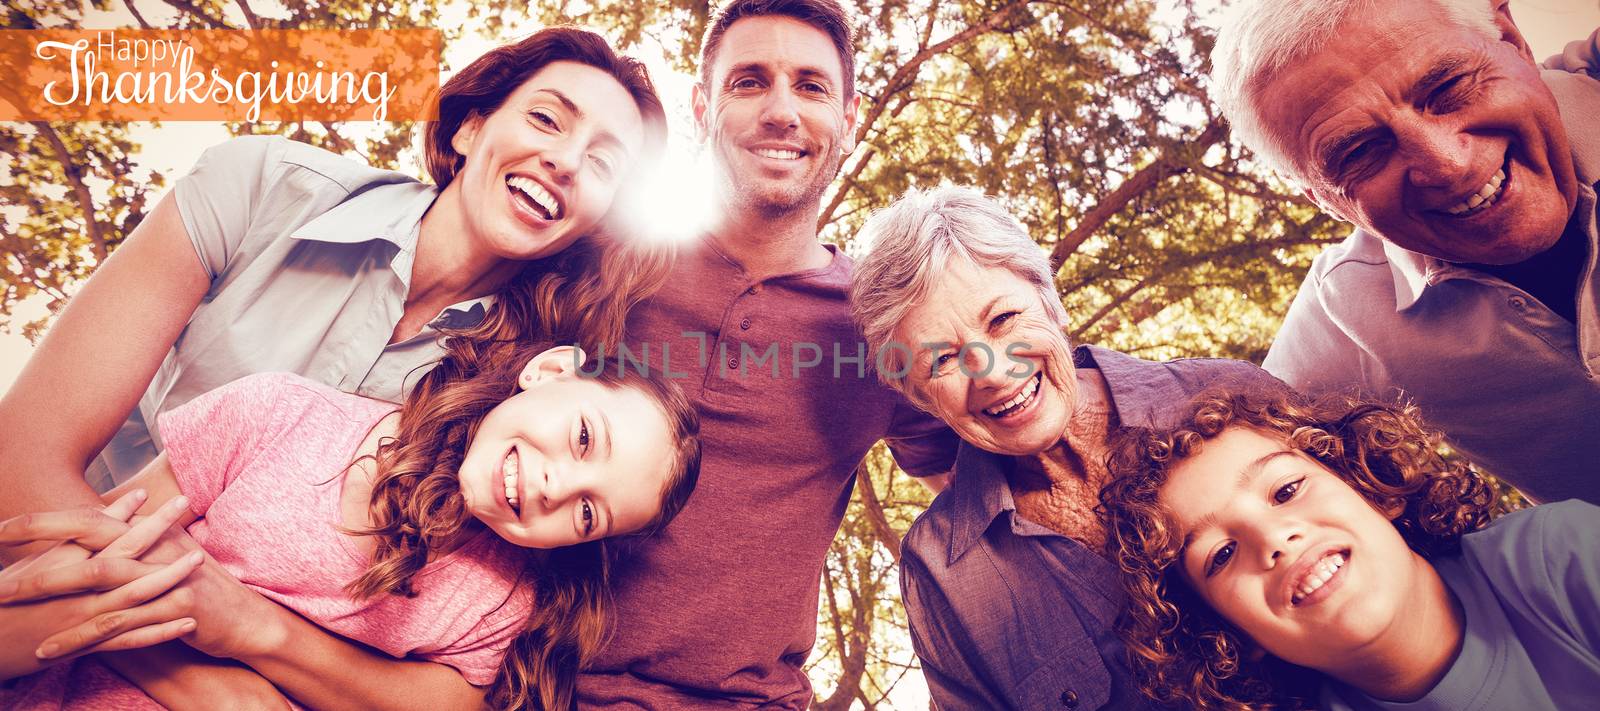 Thanksgiving greeting text against happy family smiling at park